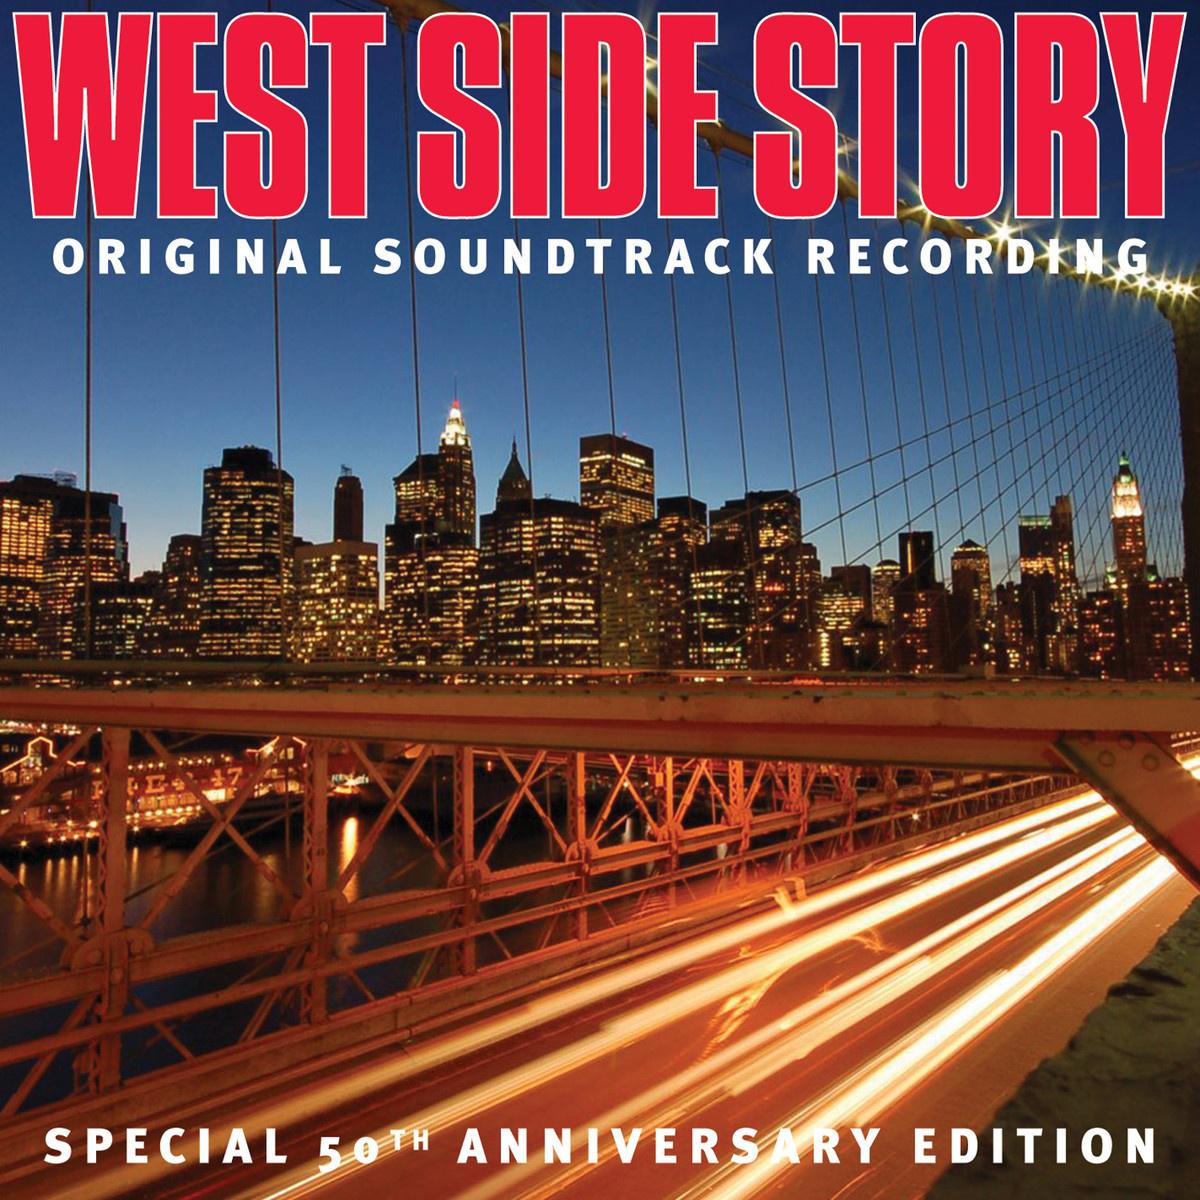 West Side Story (O.S.T Recording)专辑